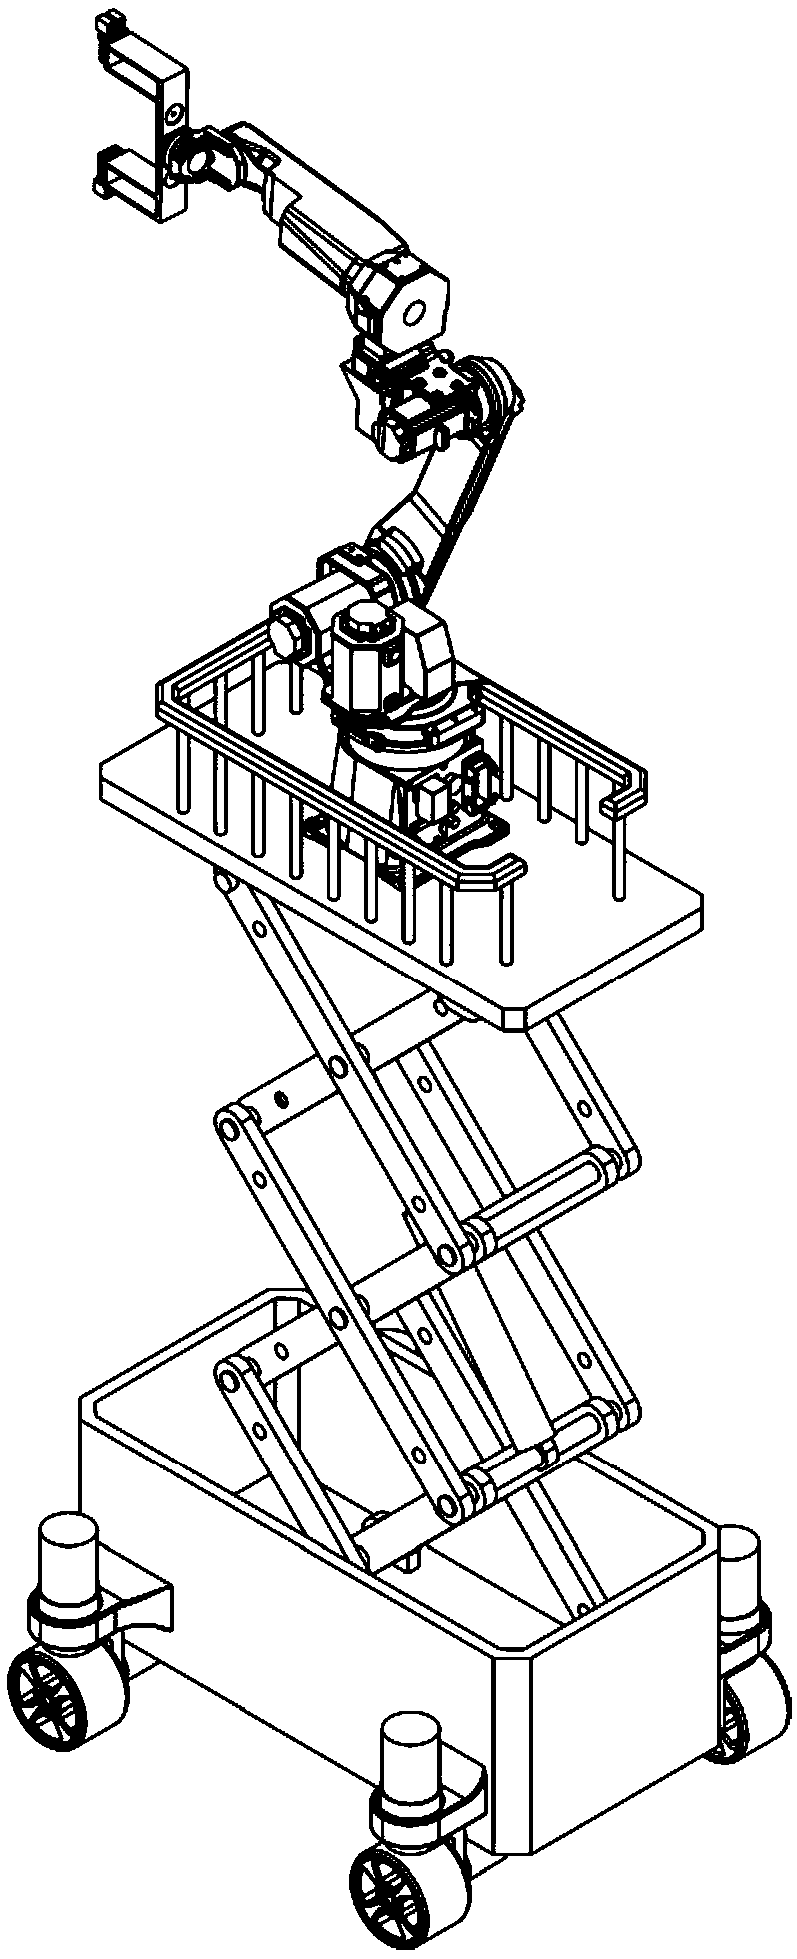 All-dimensional moving mechanism and lifting robot system